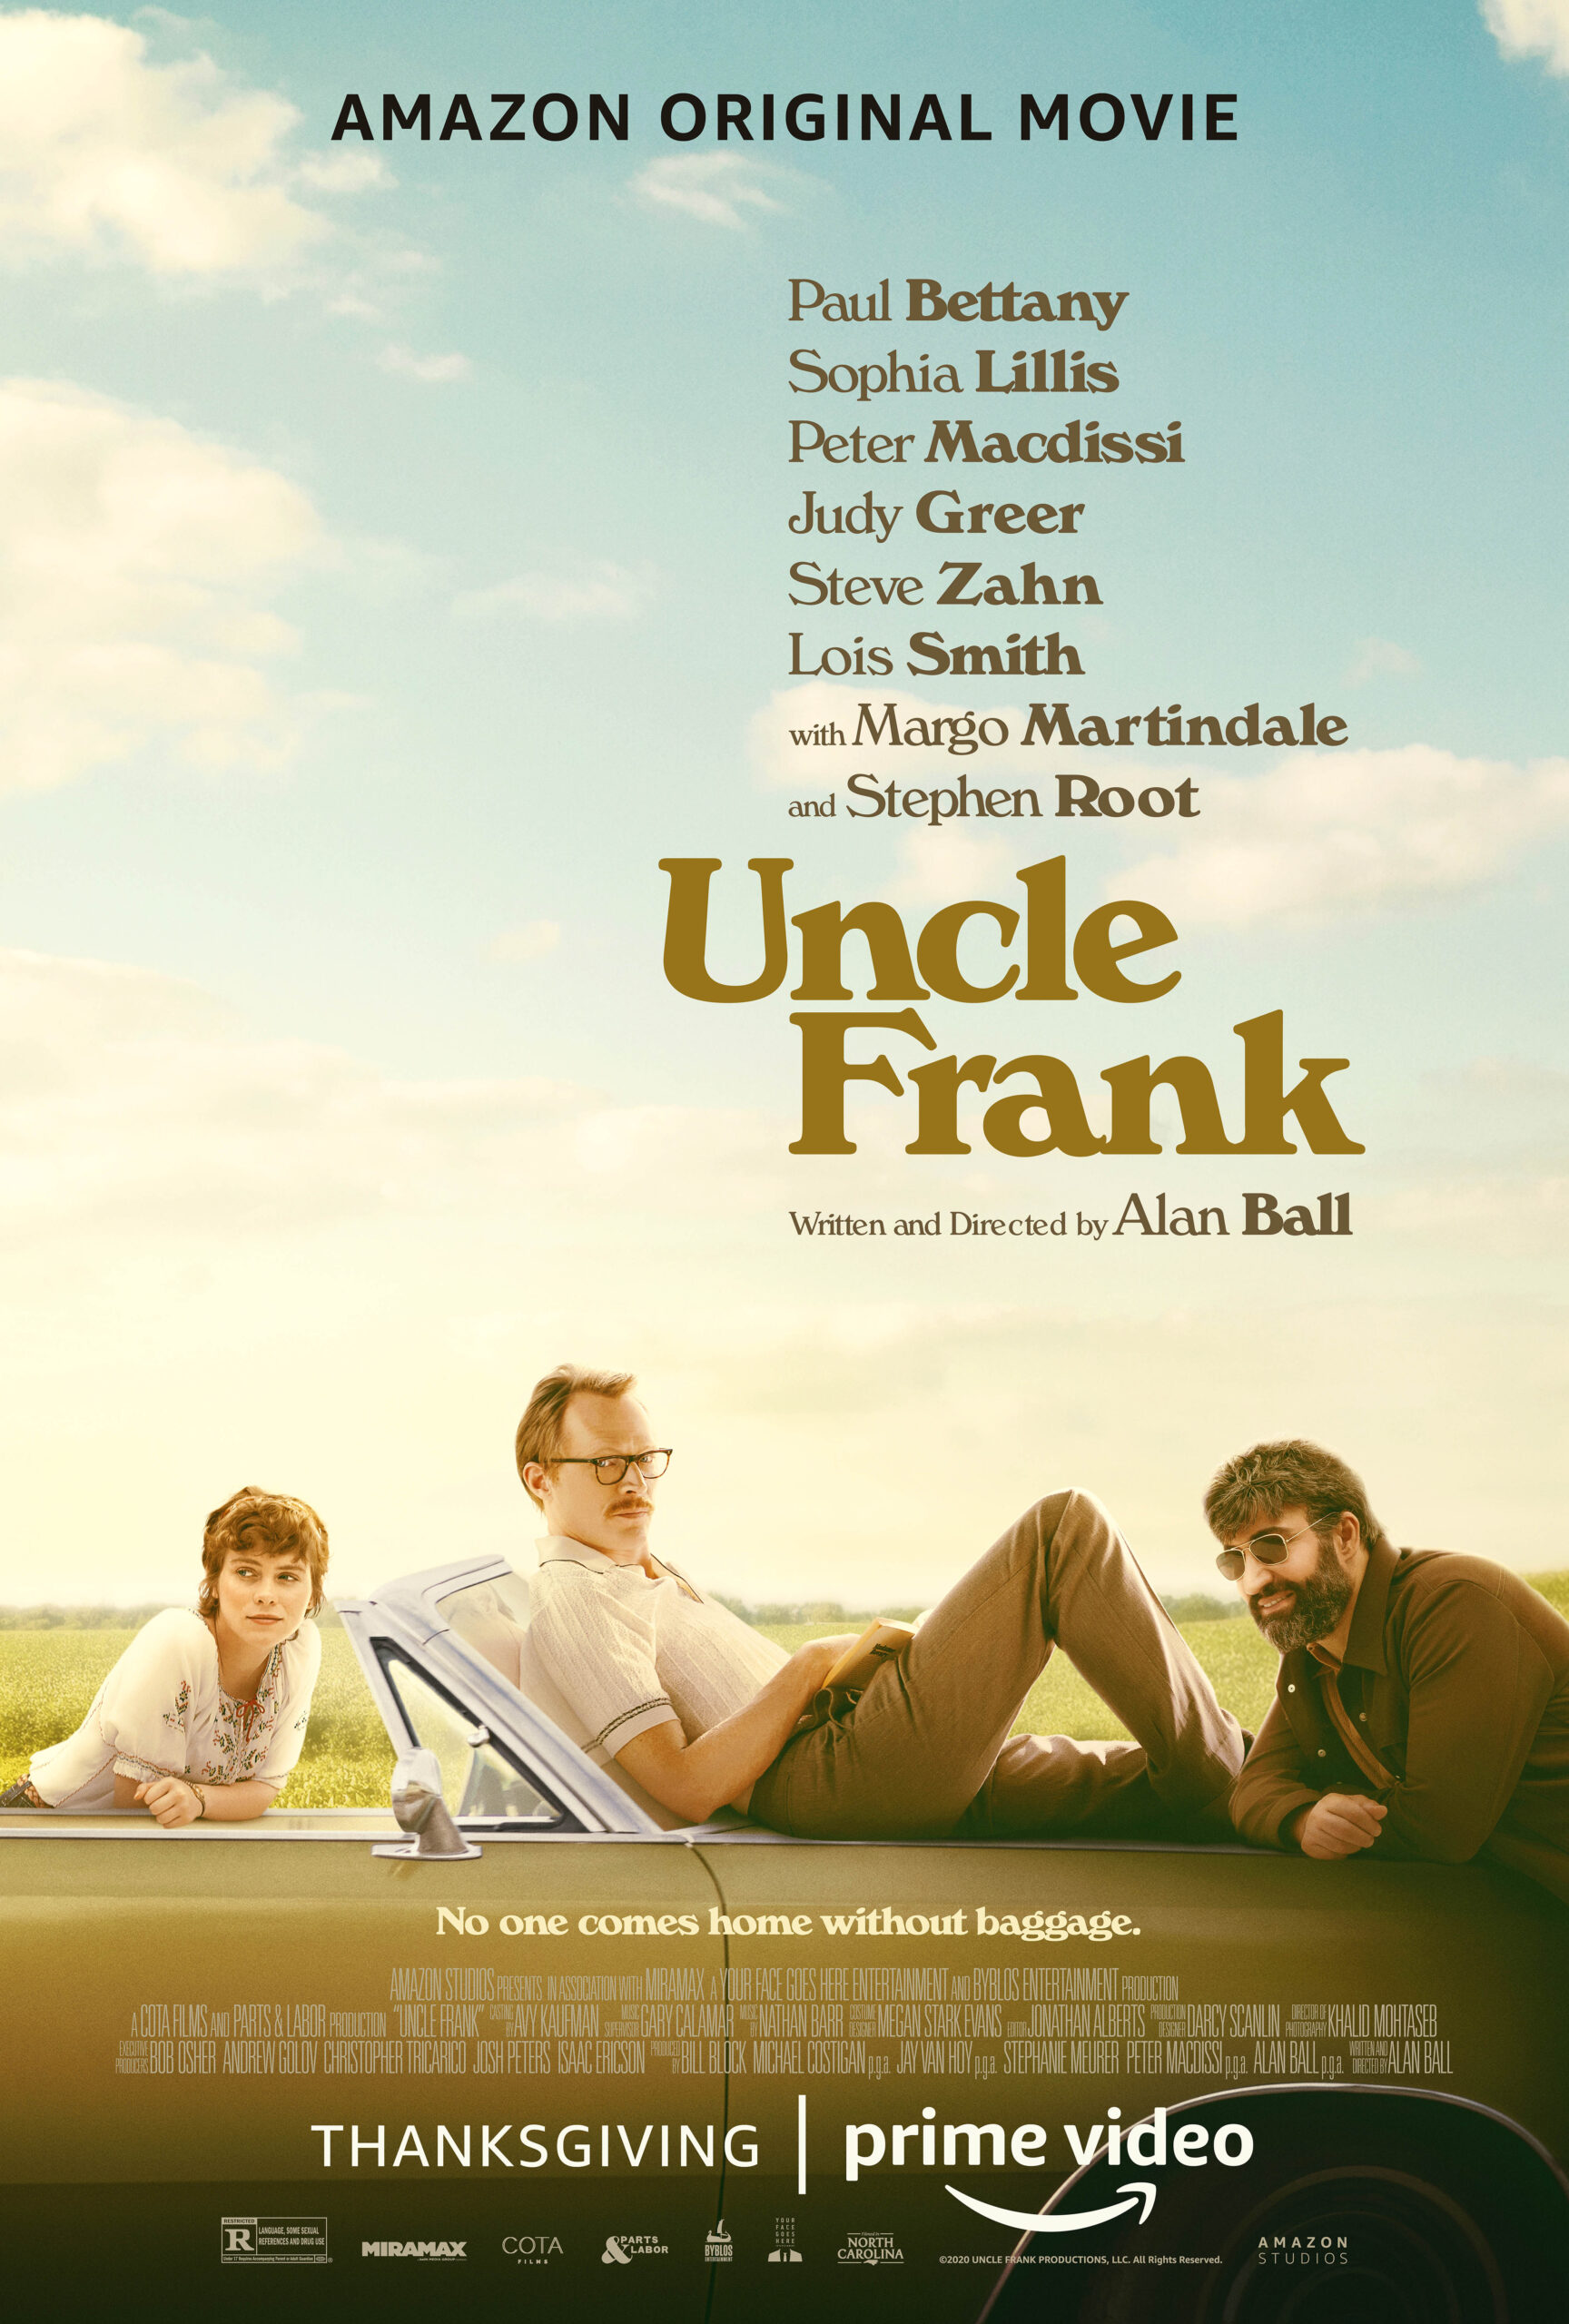 DC Readers: Attend A Free Virtual Screening Of ‘Uncle Frank’